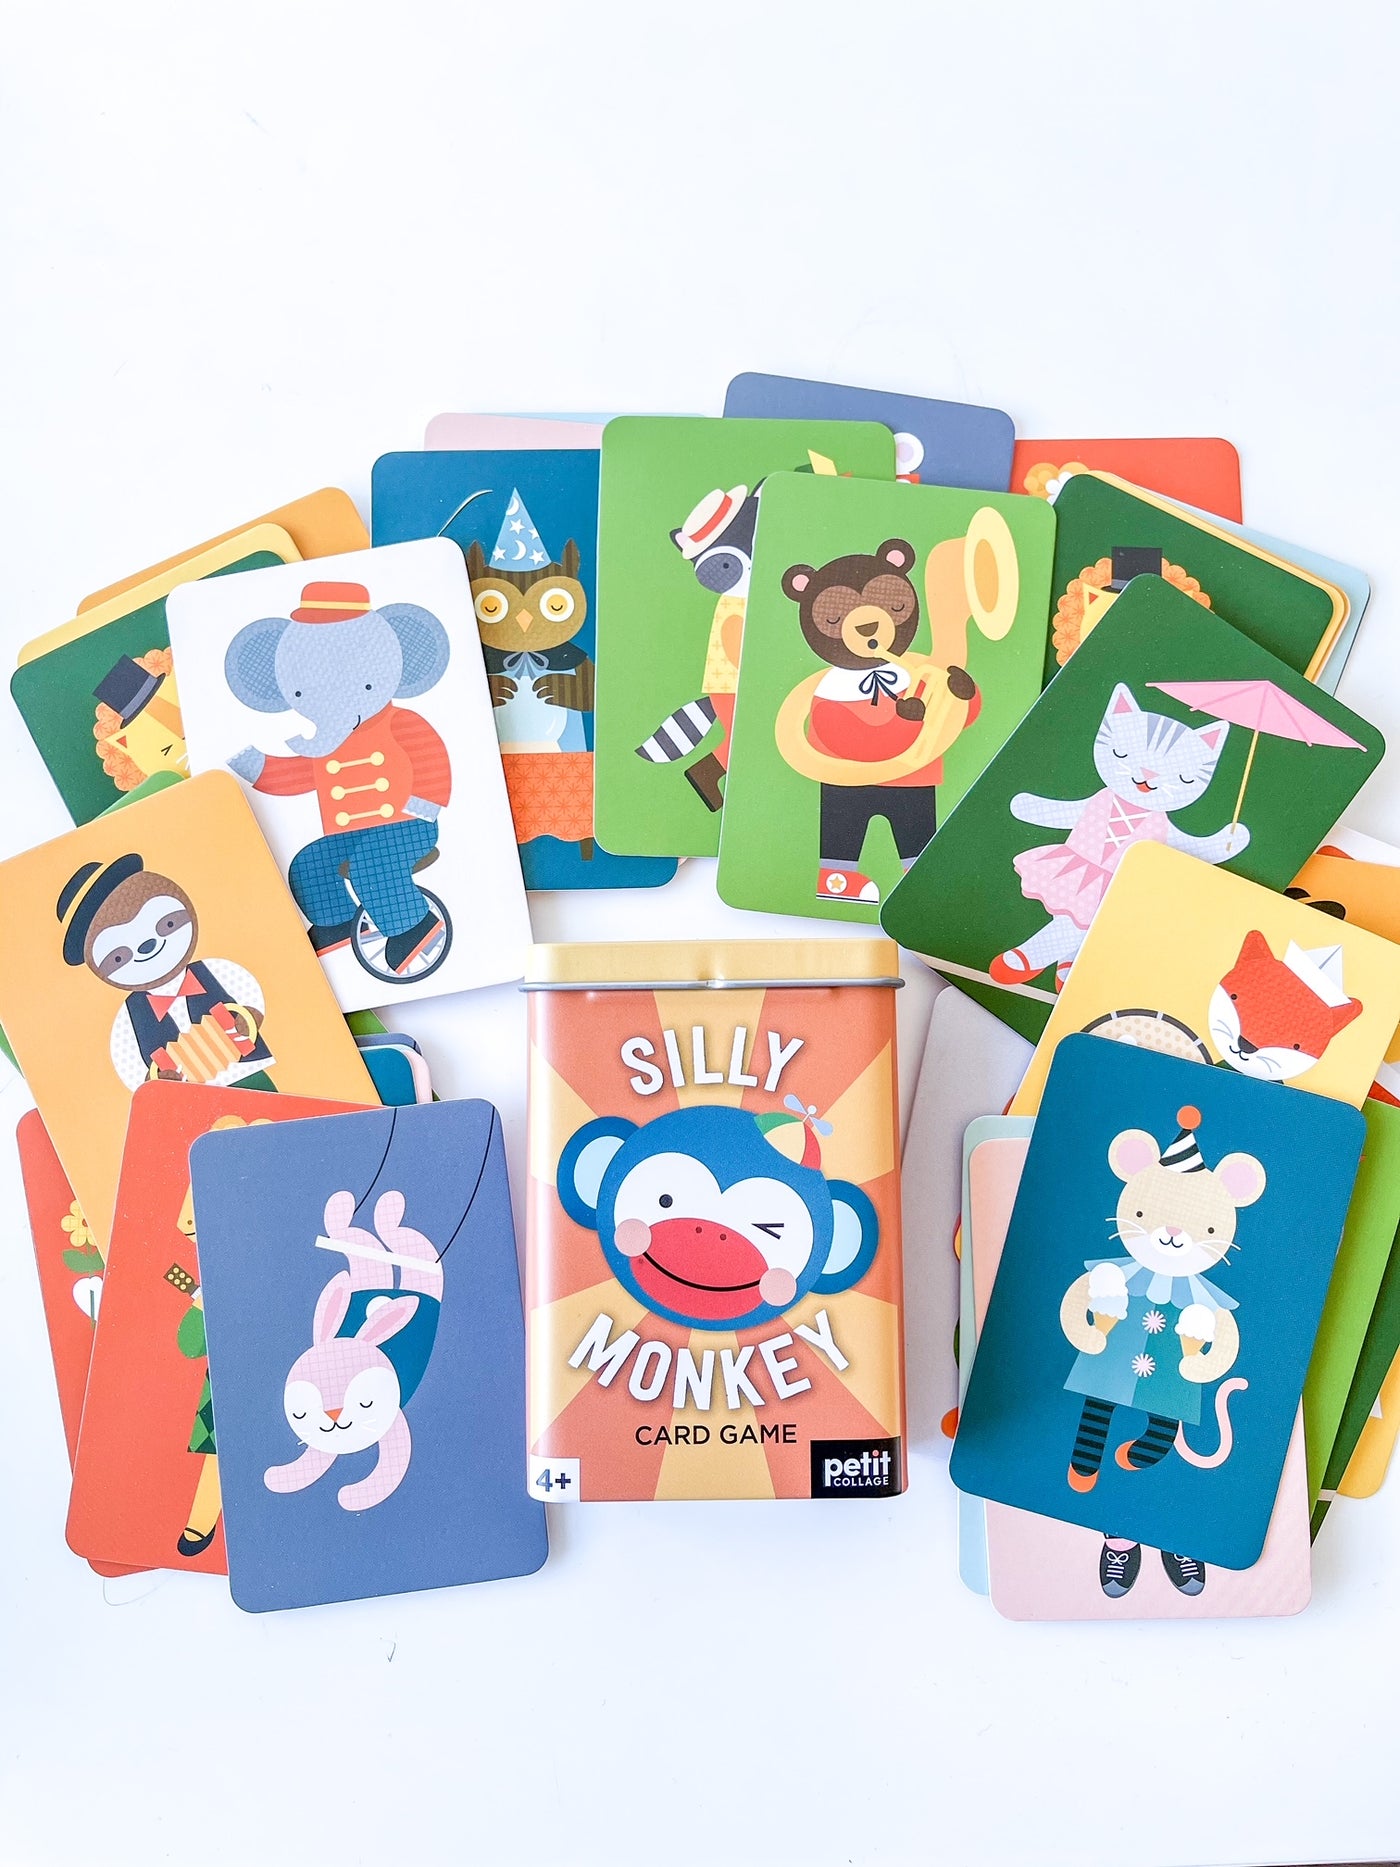 Kid's Card Game - silly monkey - Feel Better Box